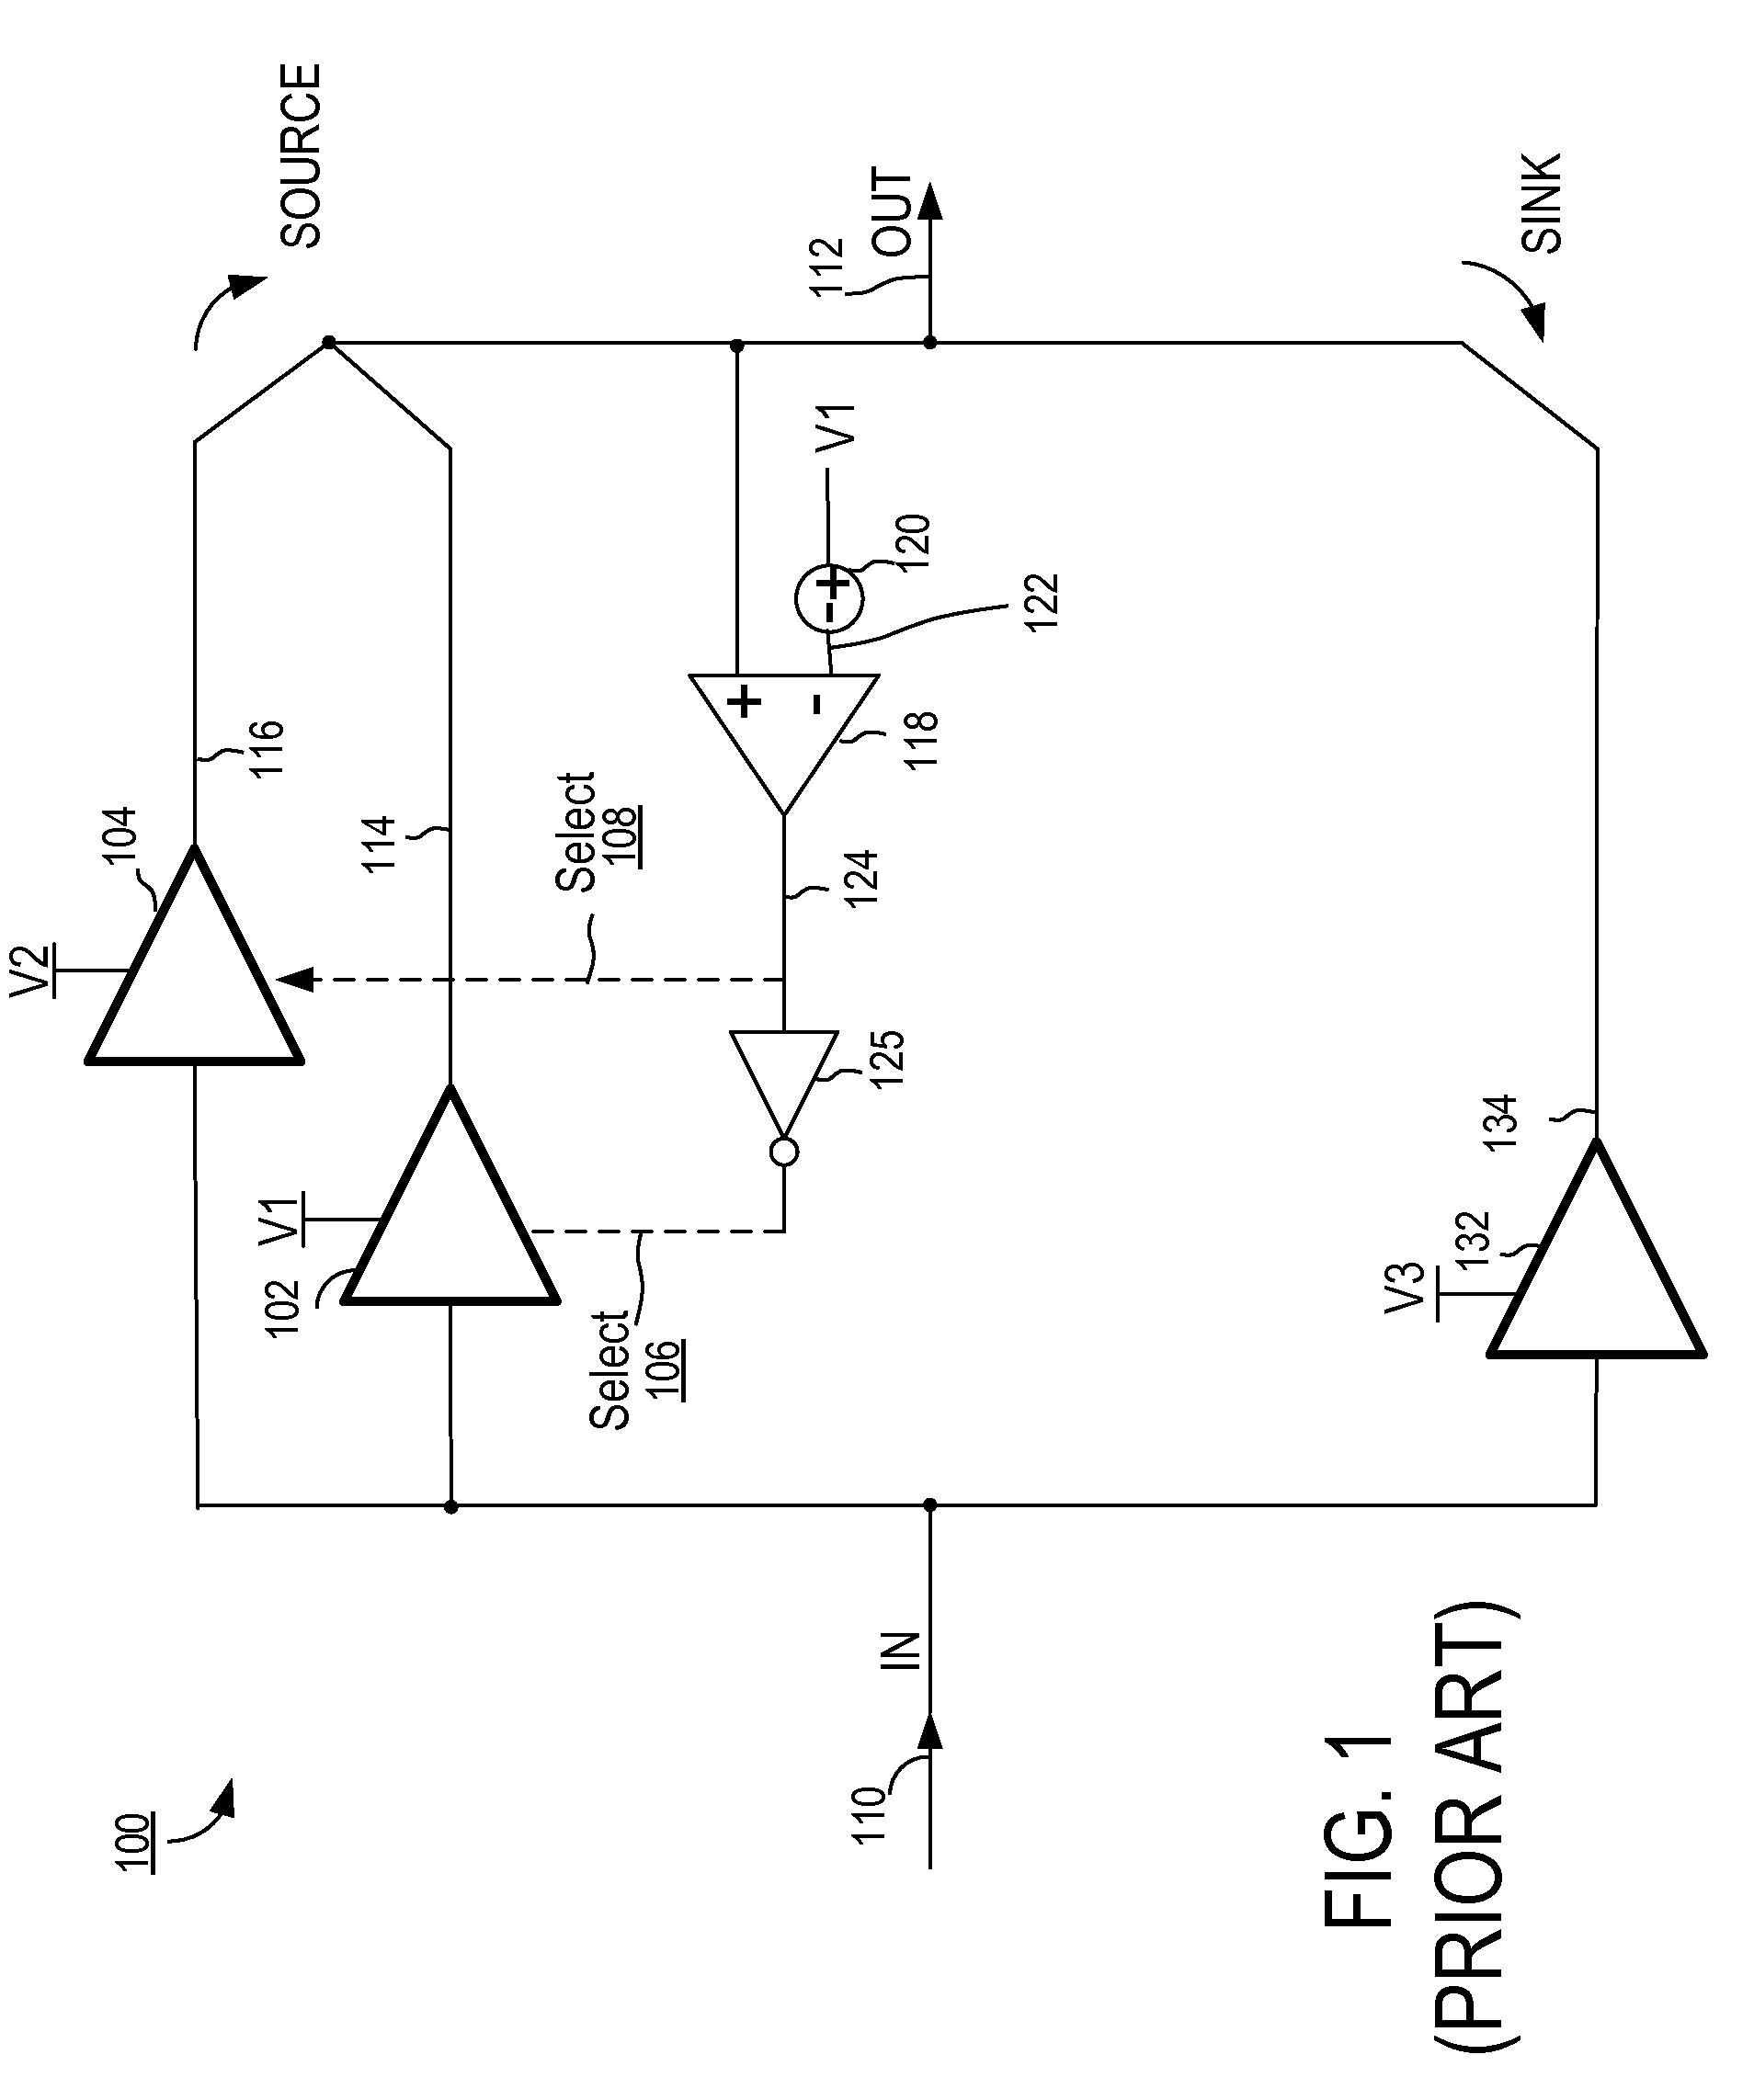 High bandwidth power supply system with high efficiency and low distortion